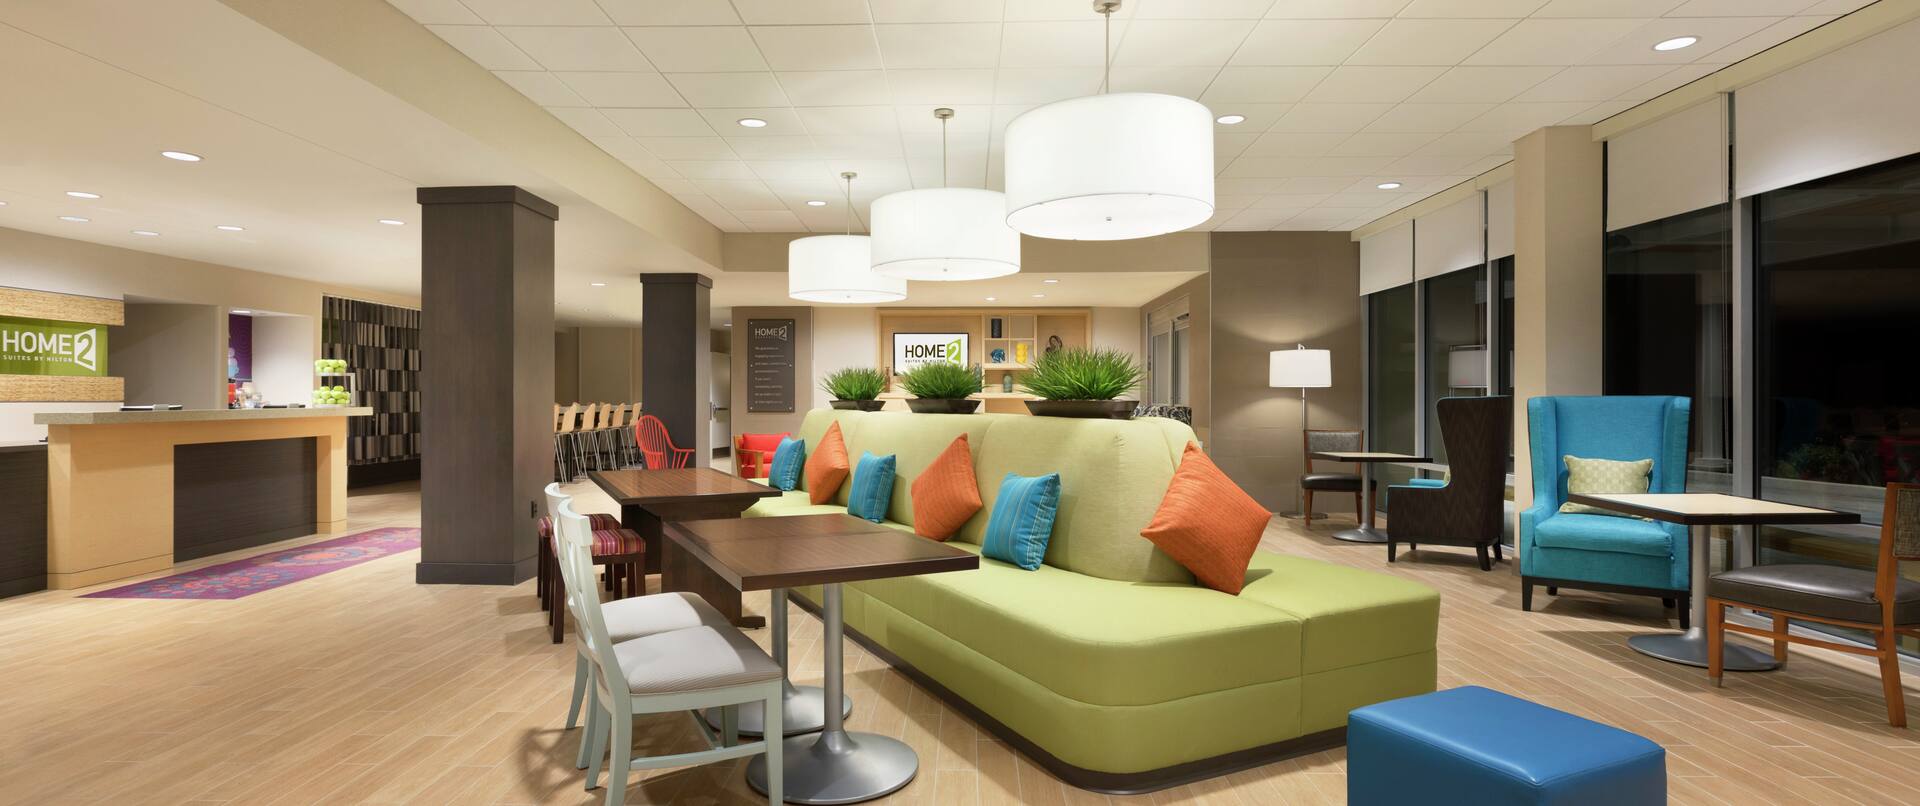 Soft Seating in Lobby Oasis